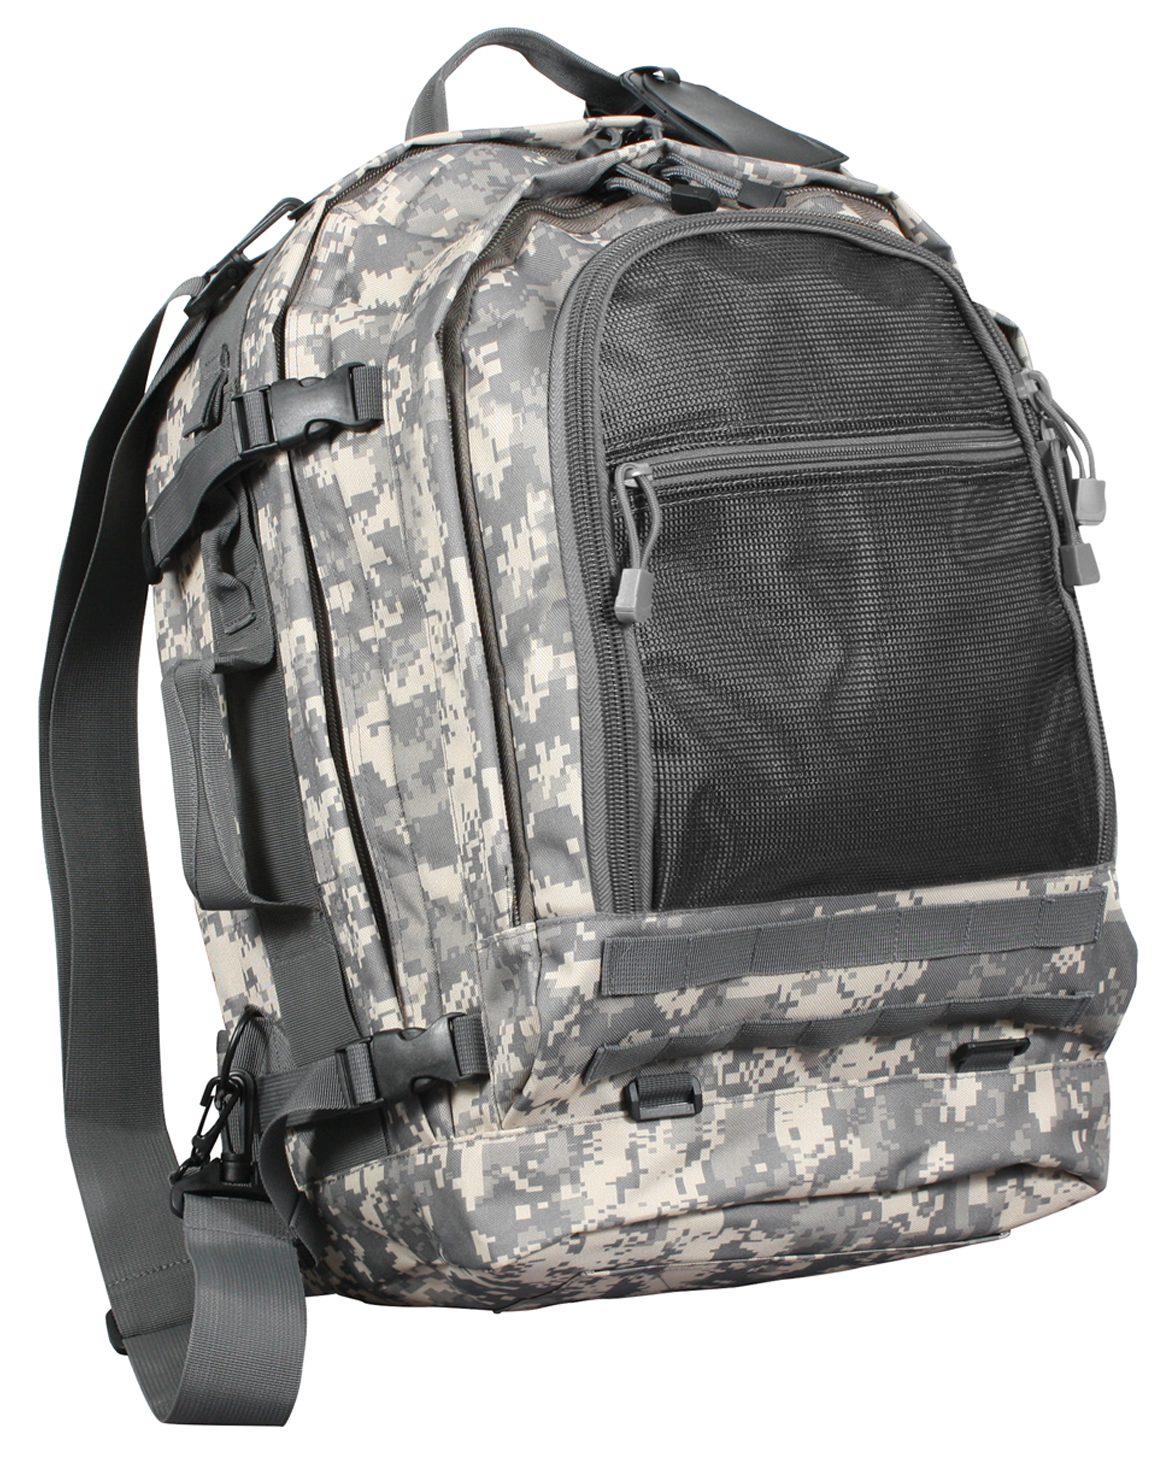 Rothco Move Out Tactical Travel Backpack - Tactical & Duty Gear